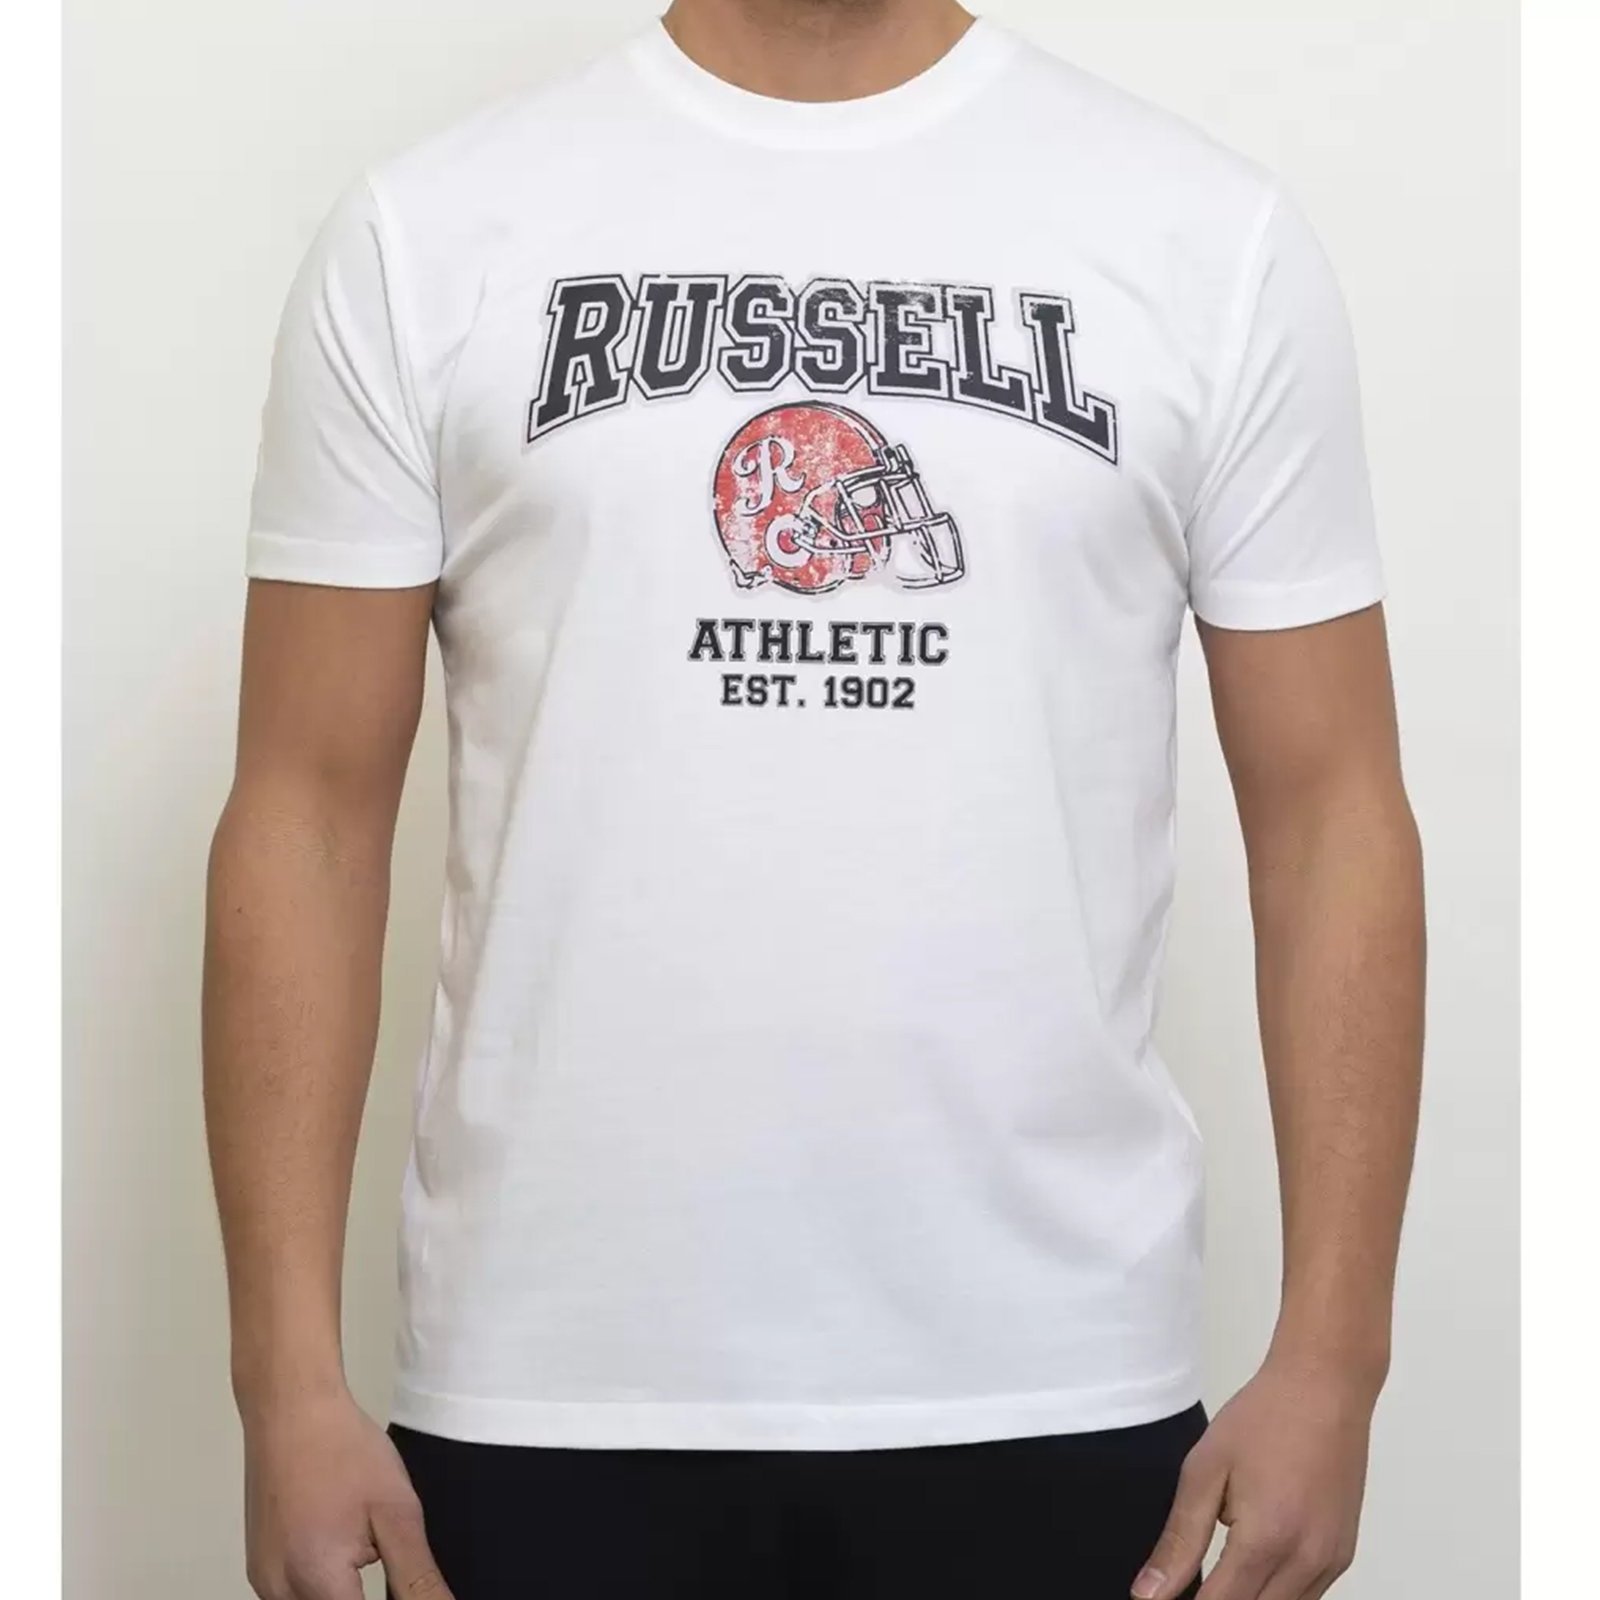 Russell Athletic - S/S CREWNECK TEE SHIRT - ΛΕΥΚΟ/UWH